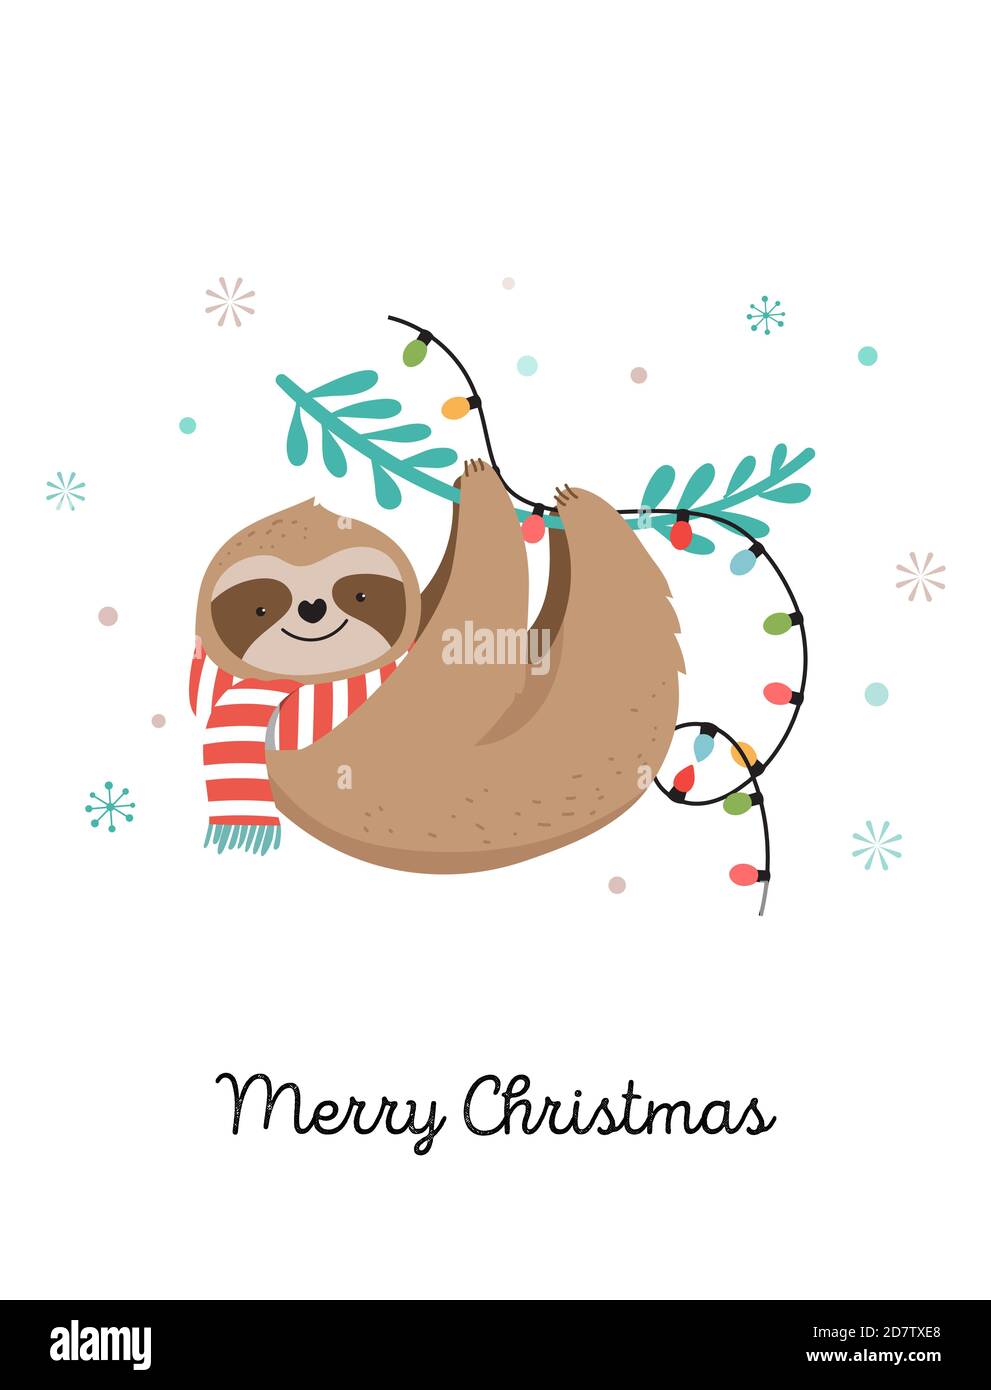 Cute sloth, funny Christmas illustrations with Santa Claus scarf - greeting cards or banner template Stock Vector